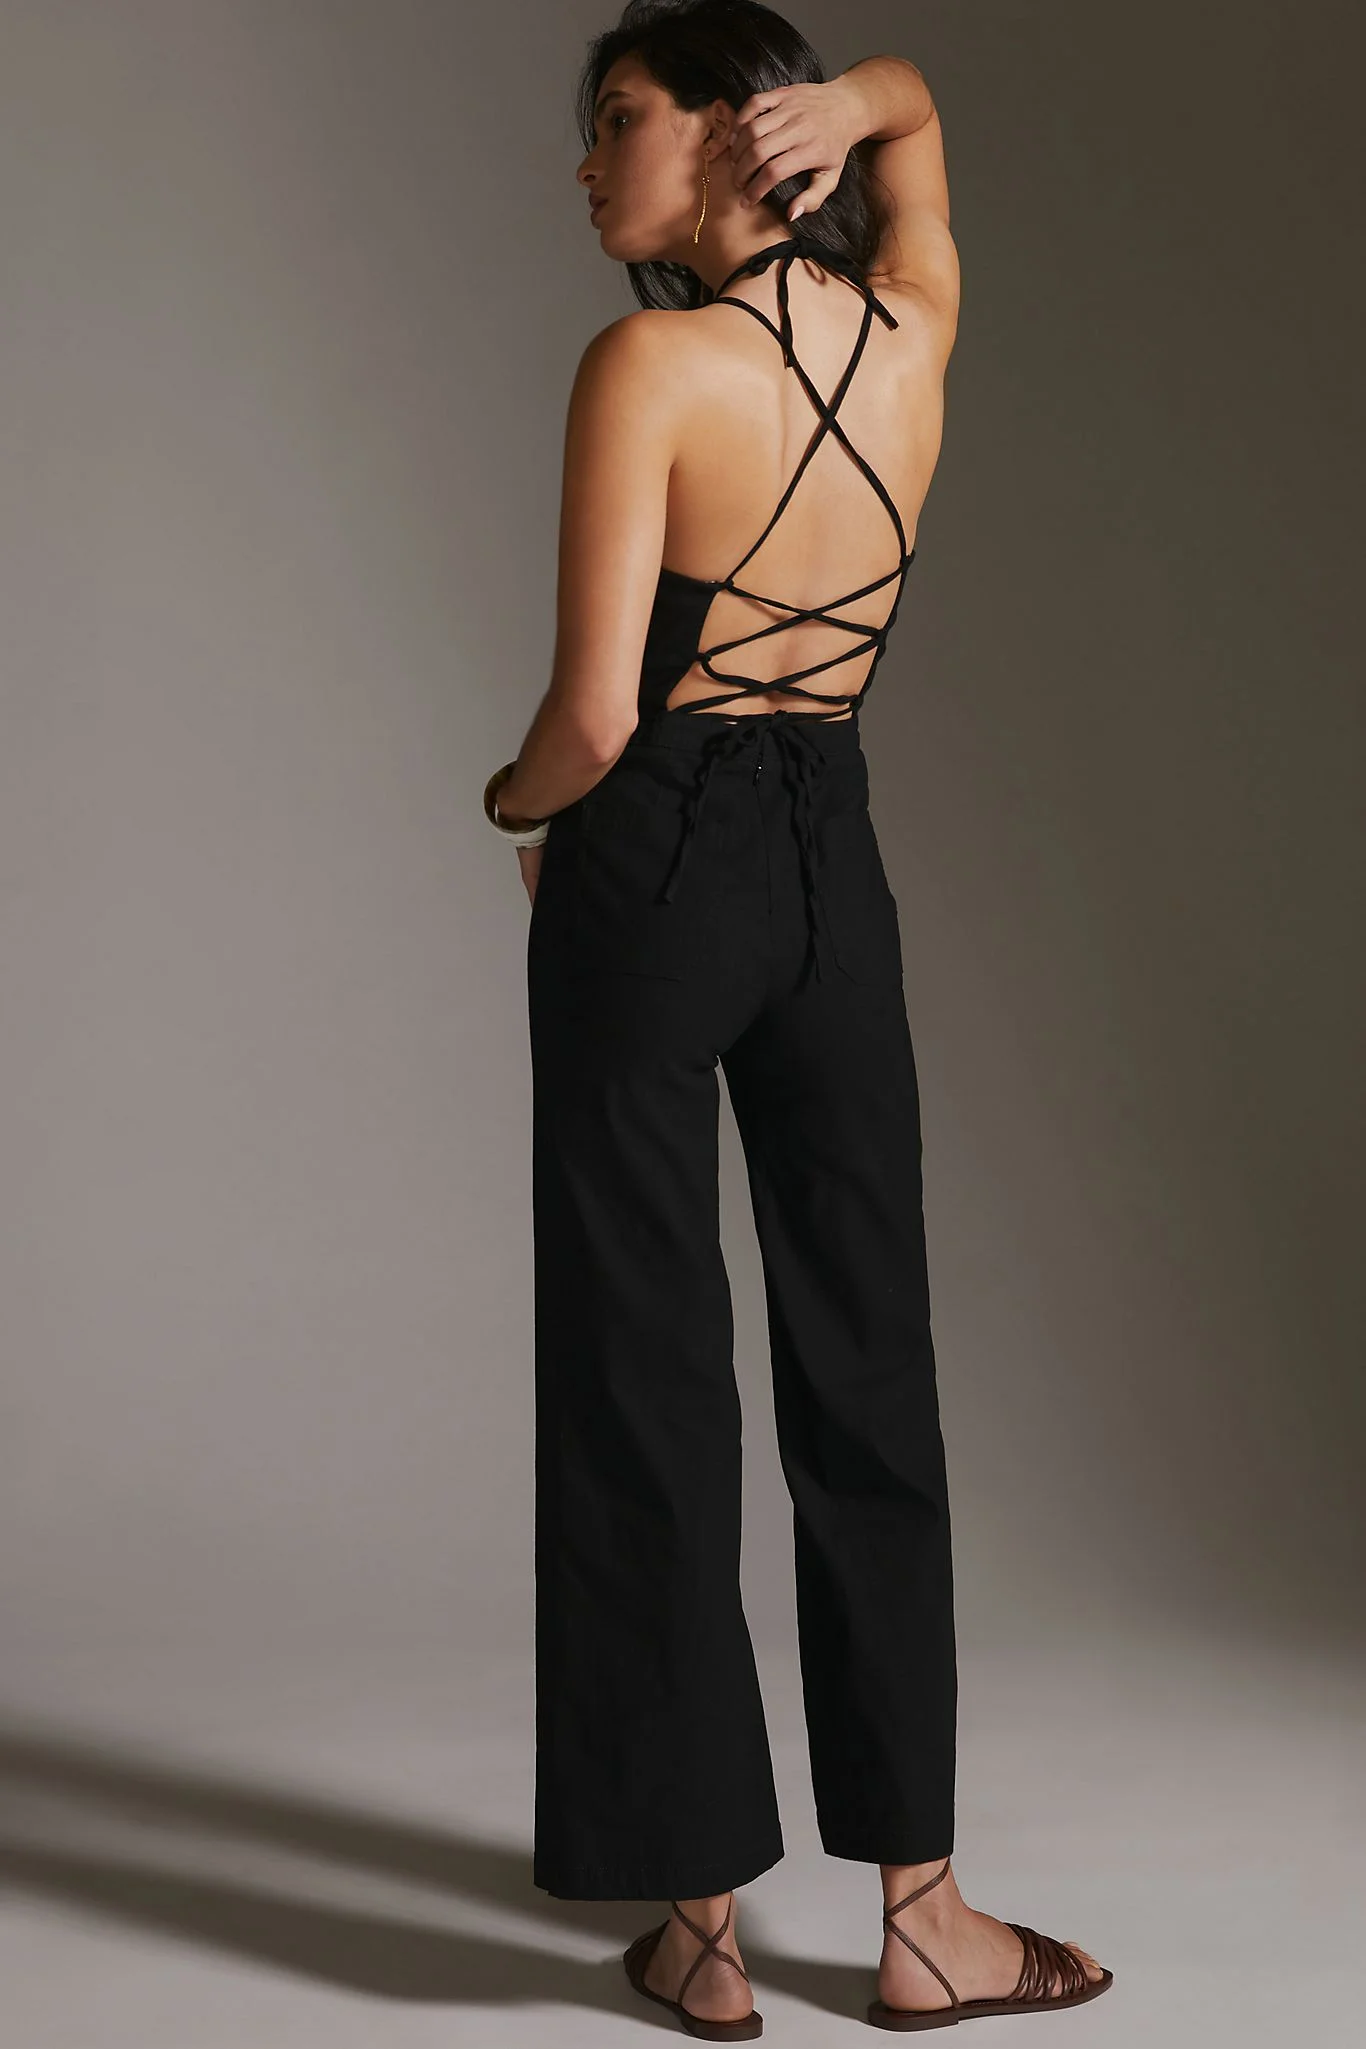 Maeve + Strappy Jumpsuit